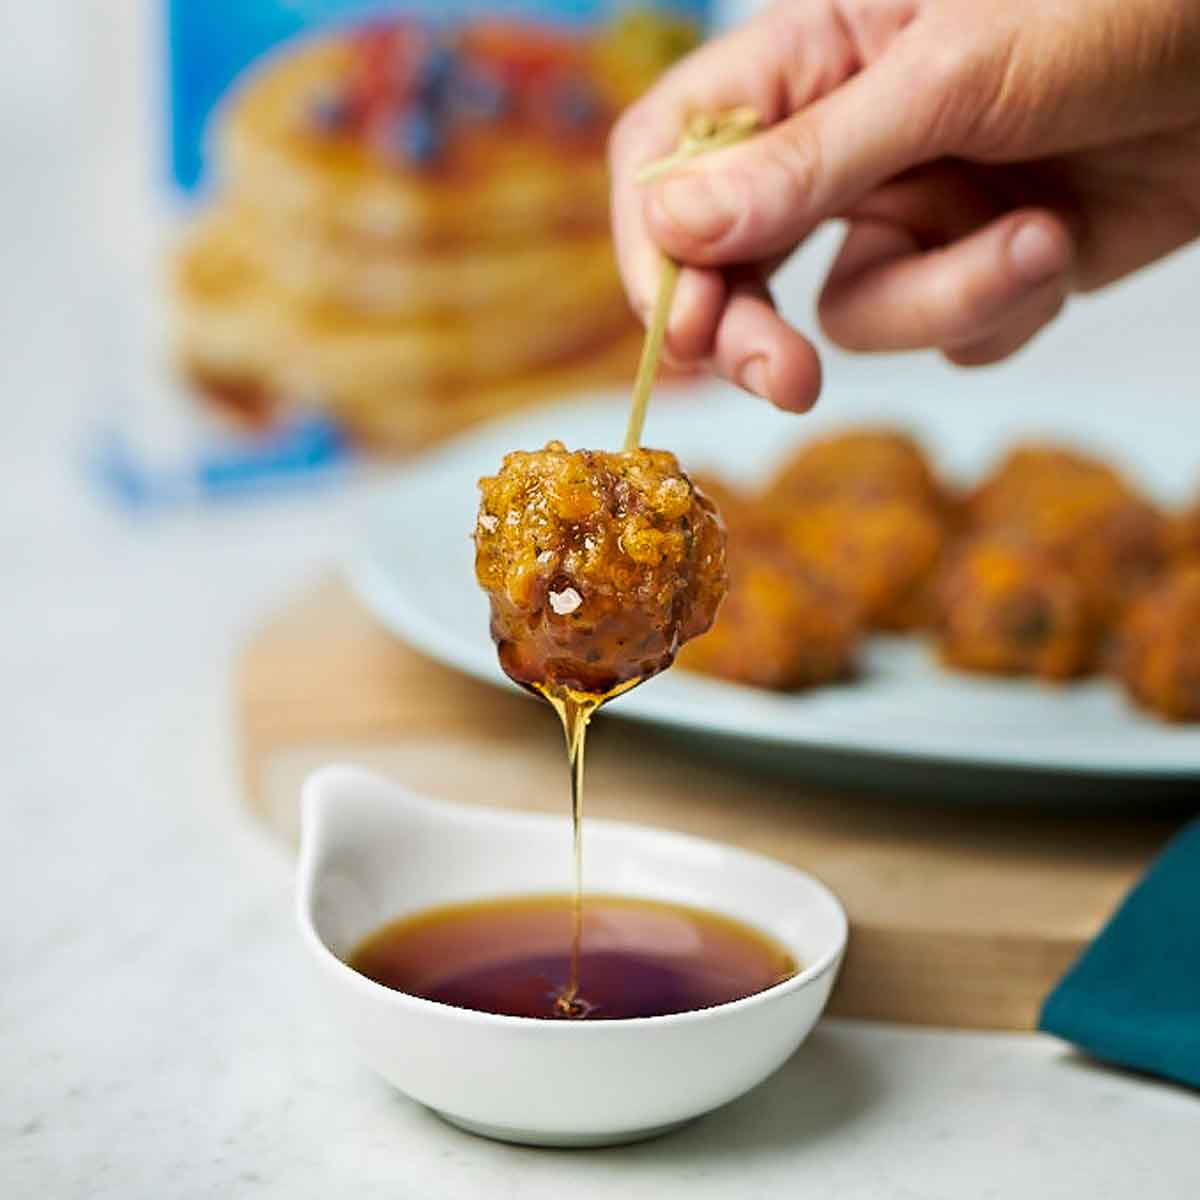 A Sausage Ball stuck with a toothpick being dipped in syrup.